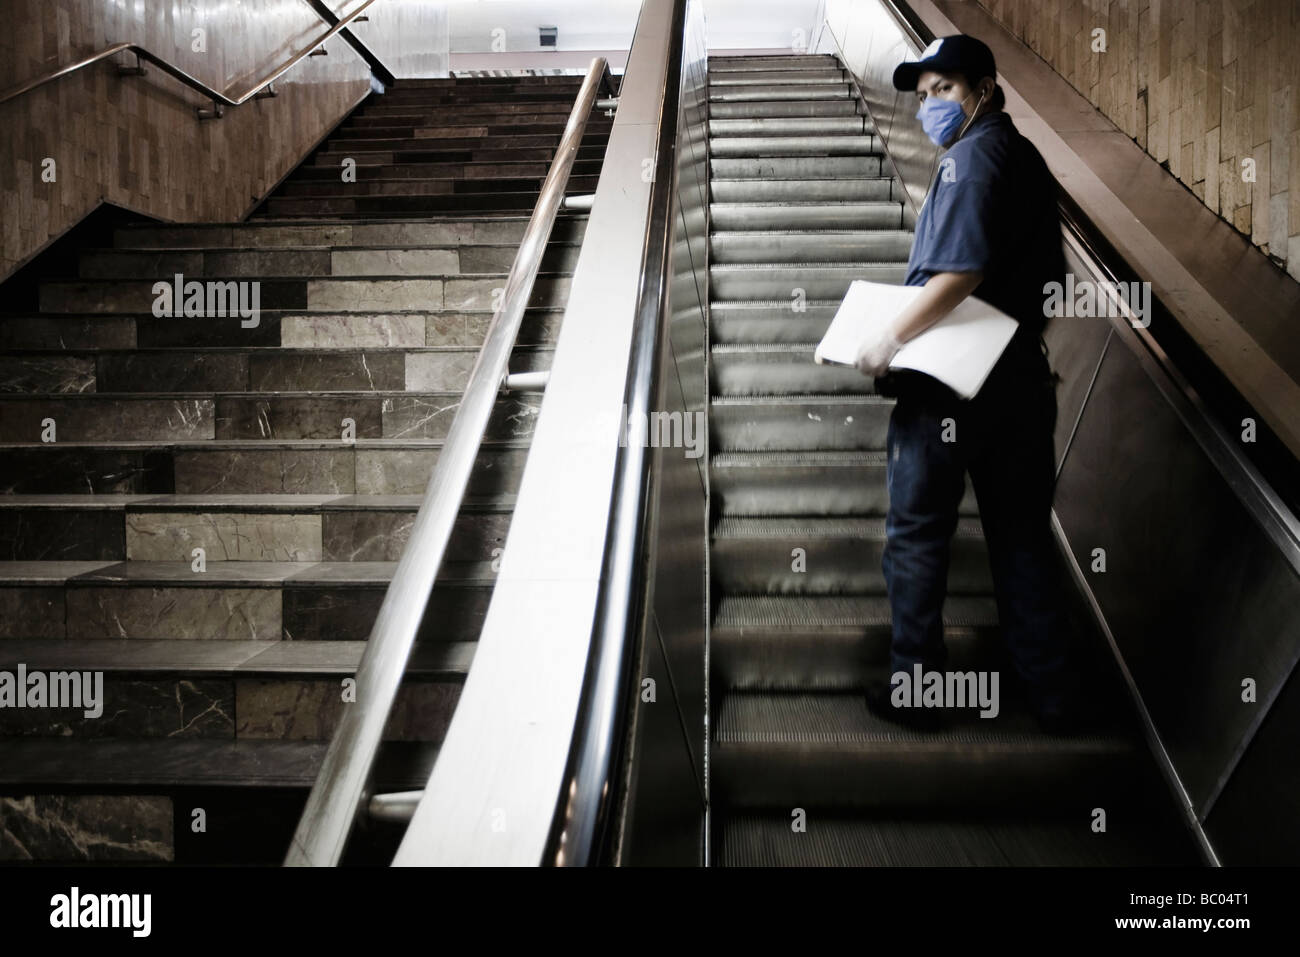 A man wearing a mask on an escalator at the subway (metro) station during the swine flu epidemic in Mexico City, DF, Mexico. Stock Photo